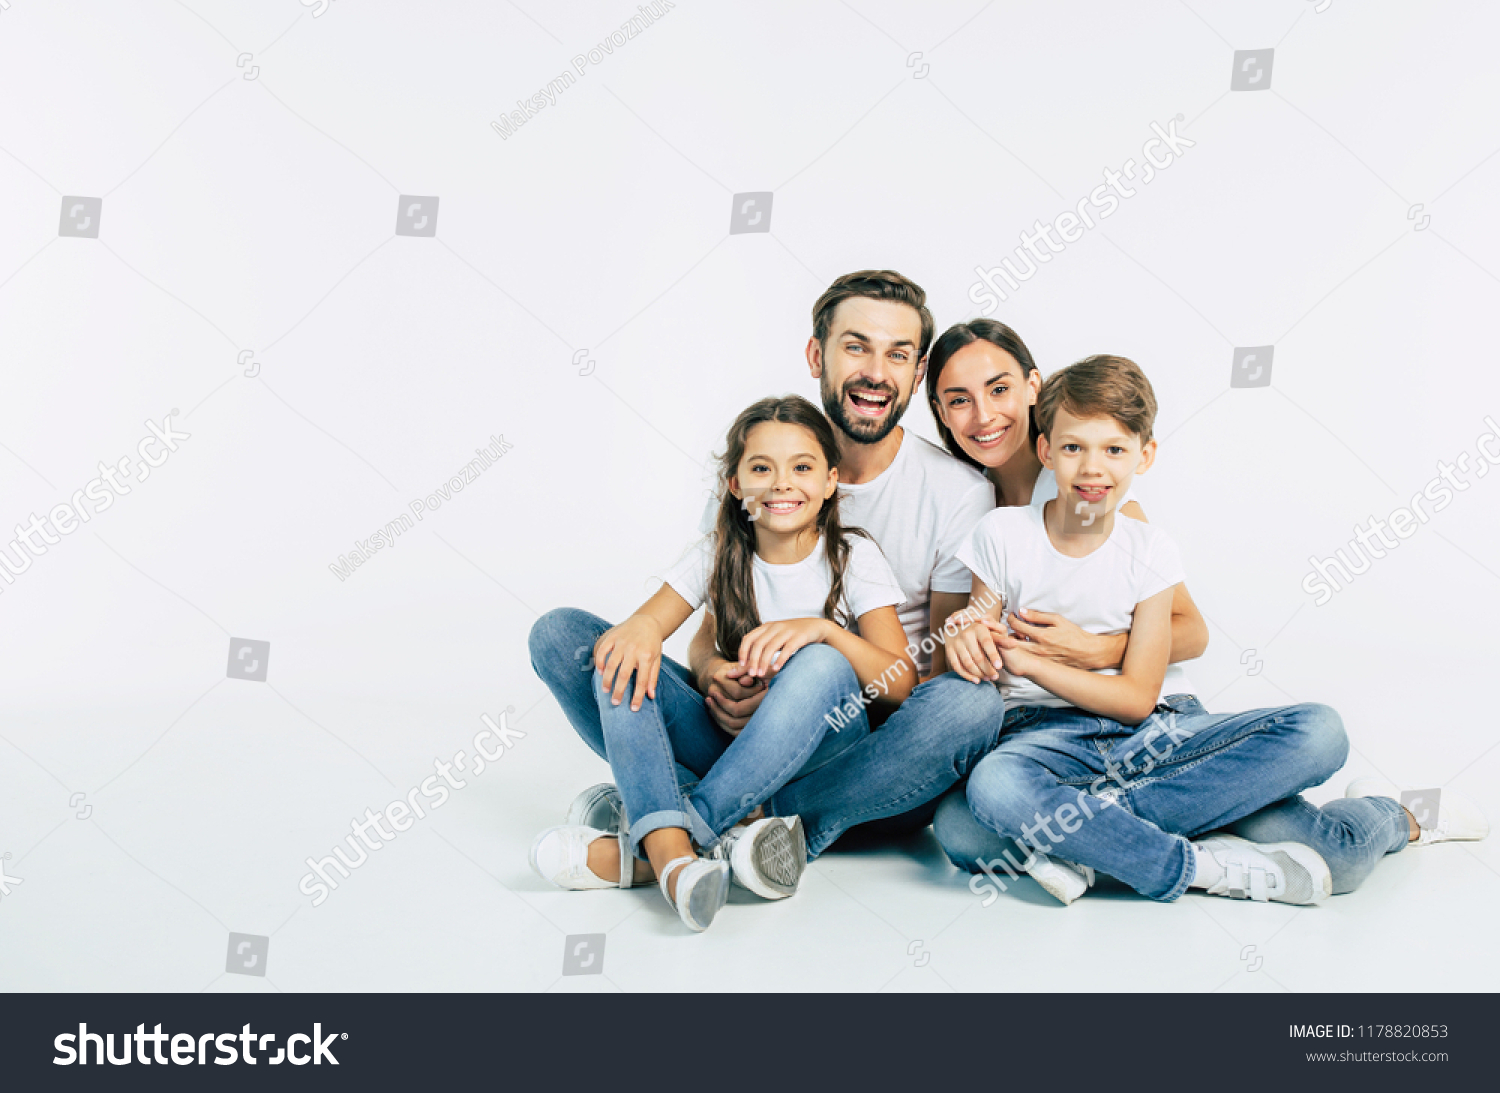 Cool team. Beautiful and happy smiling young family in white T-shirts are hugging and have a fun time together while sitting on the floor and looking on camera. #1178820853